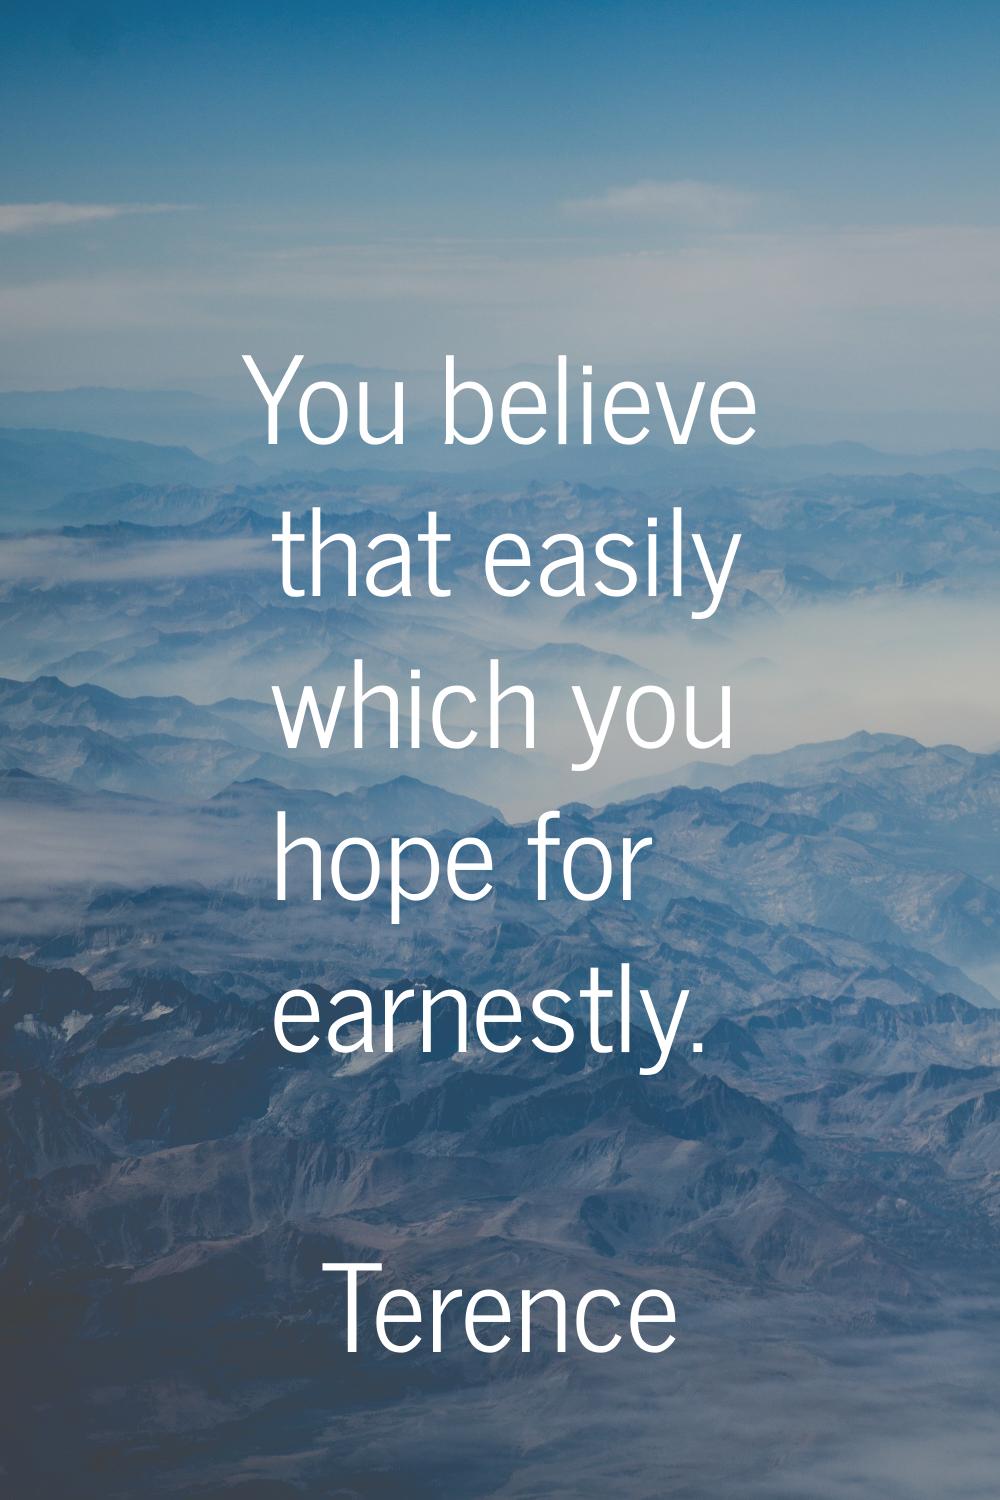 You believe that easily which you hope for earnestly.